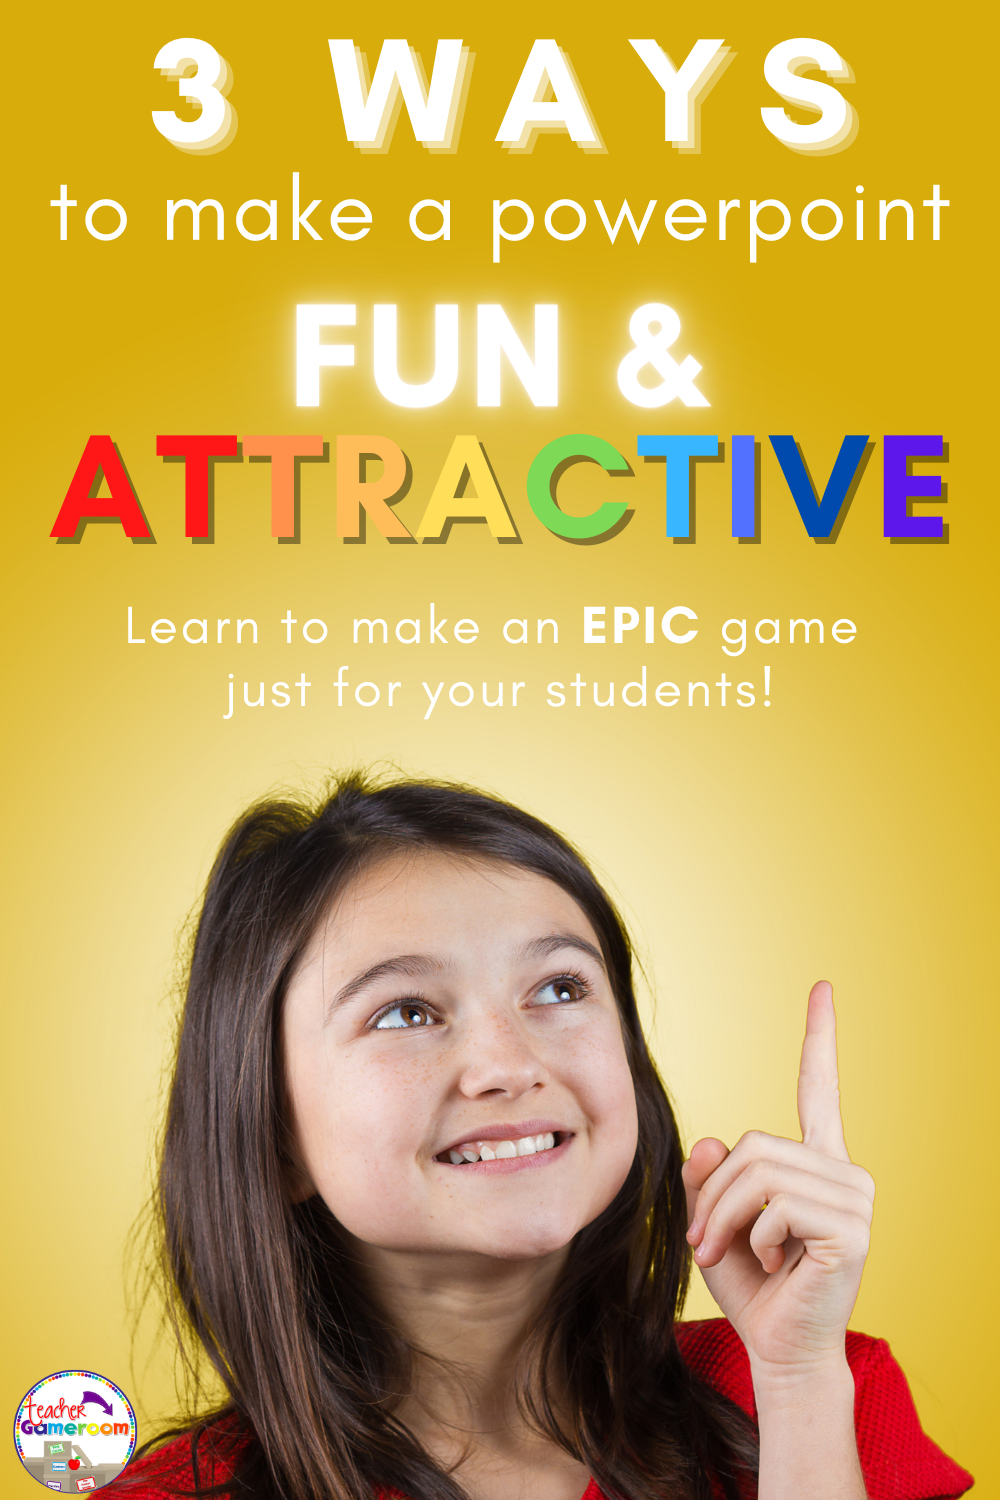 3-ways-to-make-a-powerpoint-game-fun-and-attractive-teacher-gameroom